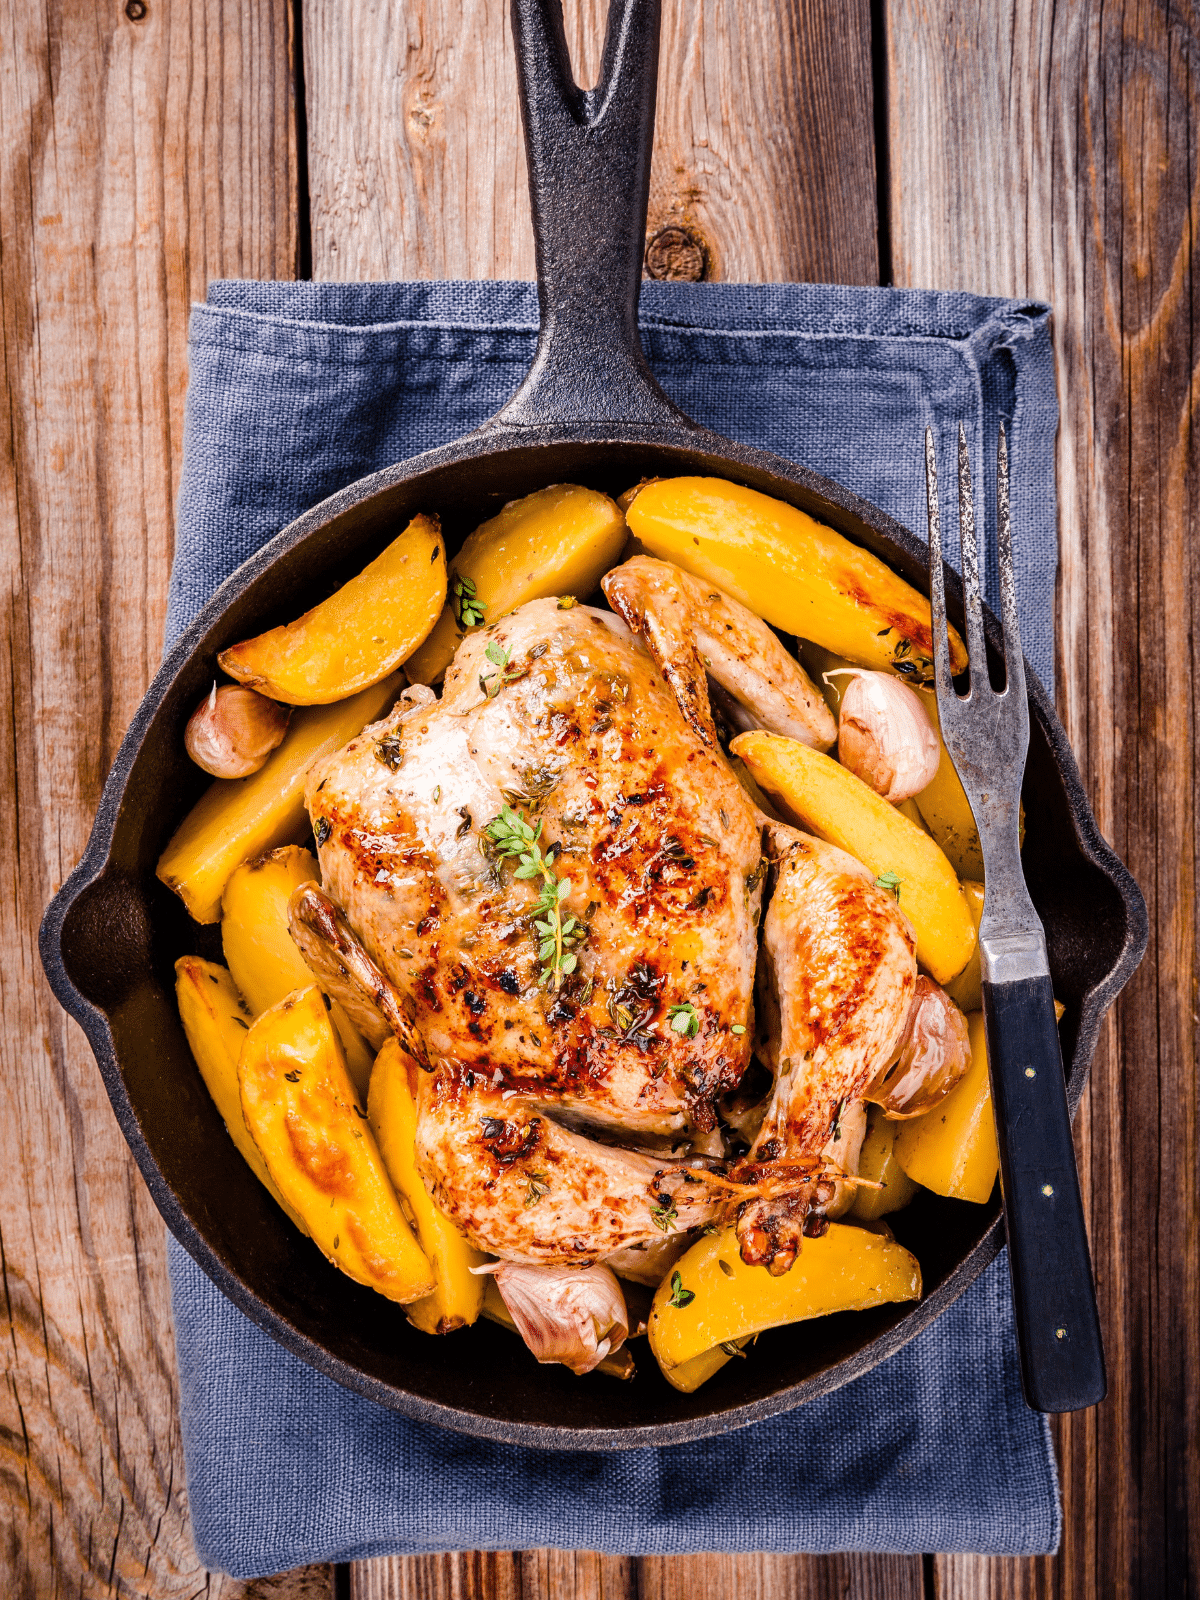 Chicken and potatoes served in a skillet on a wooden table.